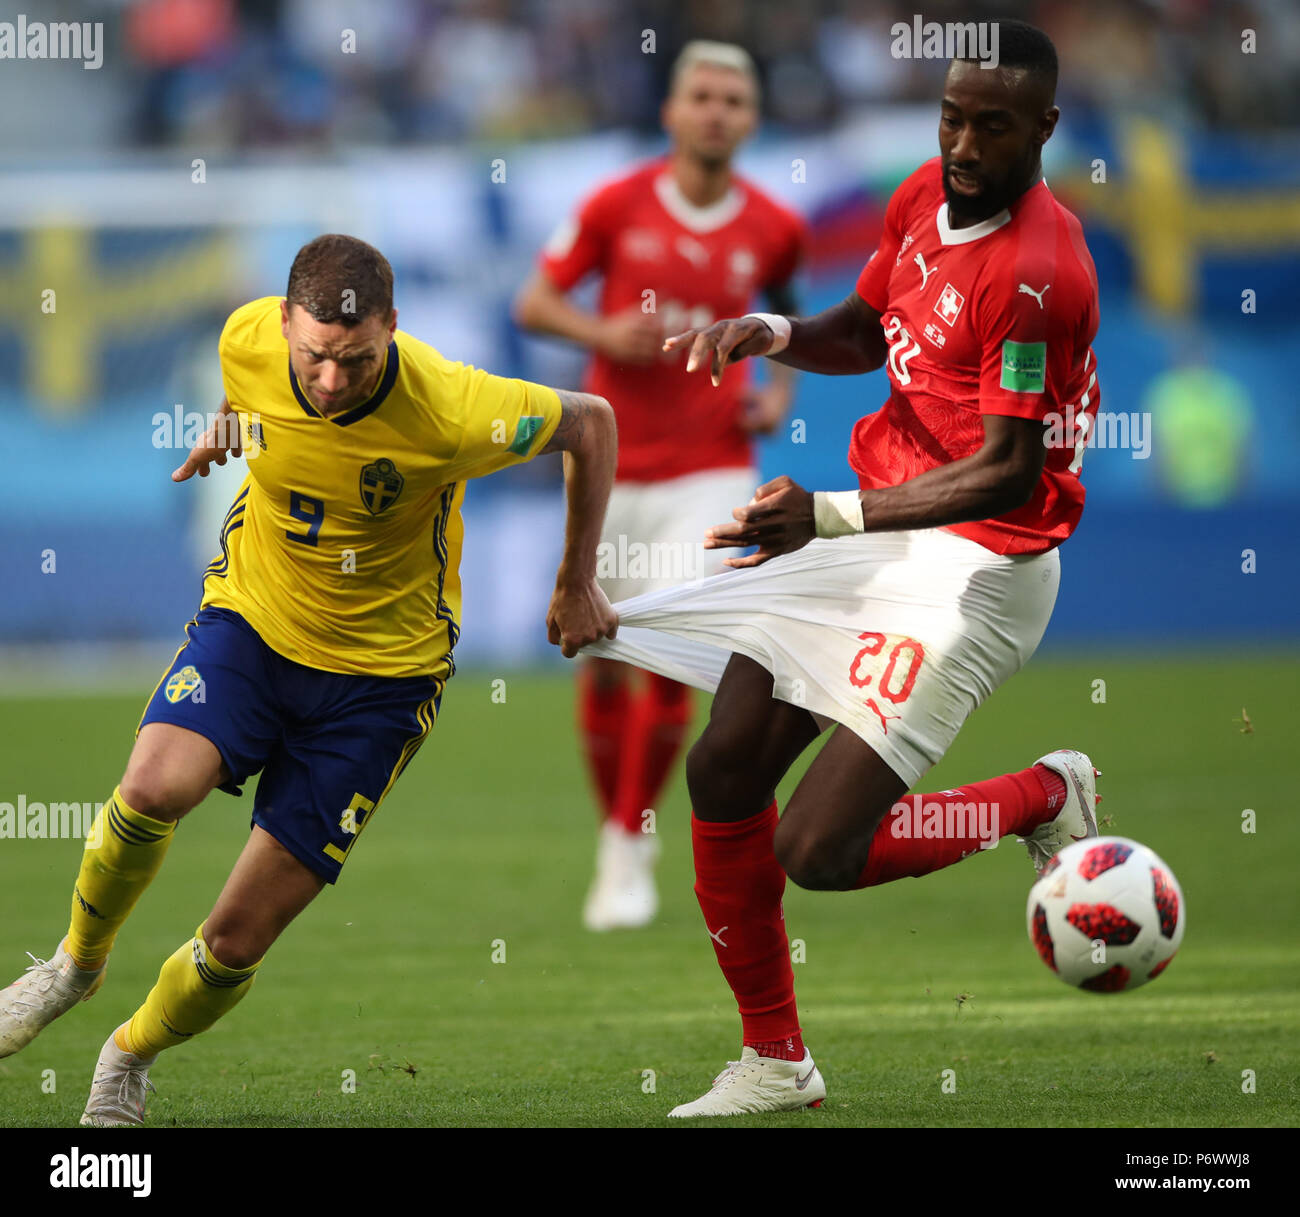 Saint Petersburg, Russia. 3rd July, 2018. Johan Djourou (R) of Switzerland vies with Marcus Berg of Sweden during the 2018 FIFA World Cup round of 16 match between Switzerland and Sweden in Saint Petersburg, Russia, July 3, 2018. Sweden won 1-0 and advanced to the quarter-final. Credit: Wu Zhuang/Xinhua/Alamy Live News Stock Photo